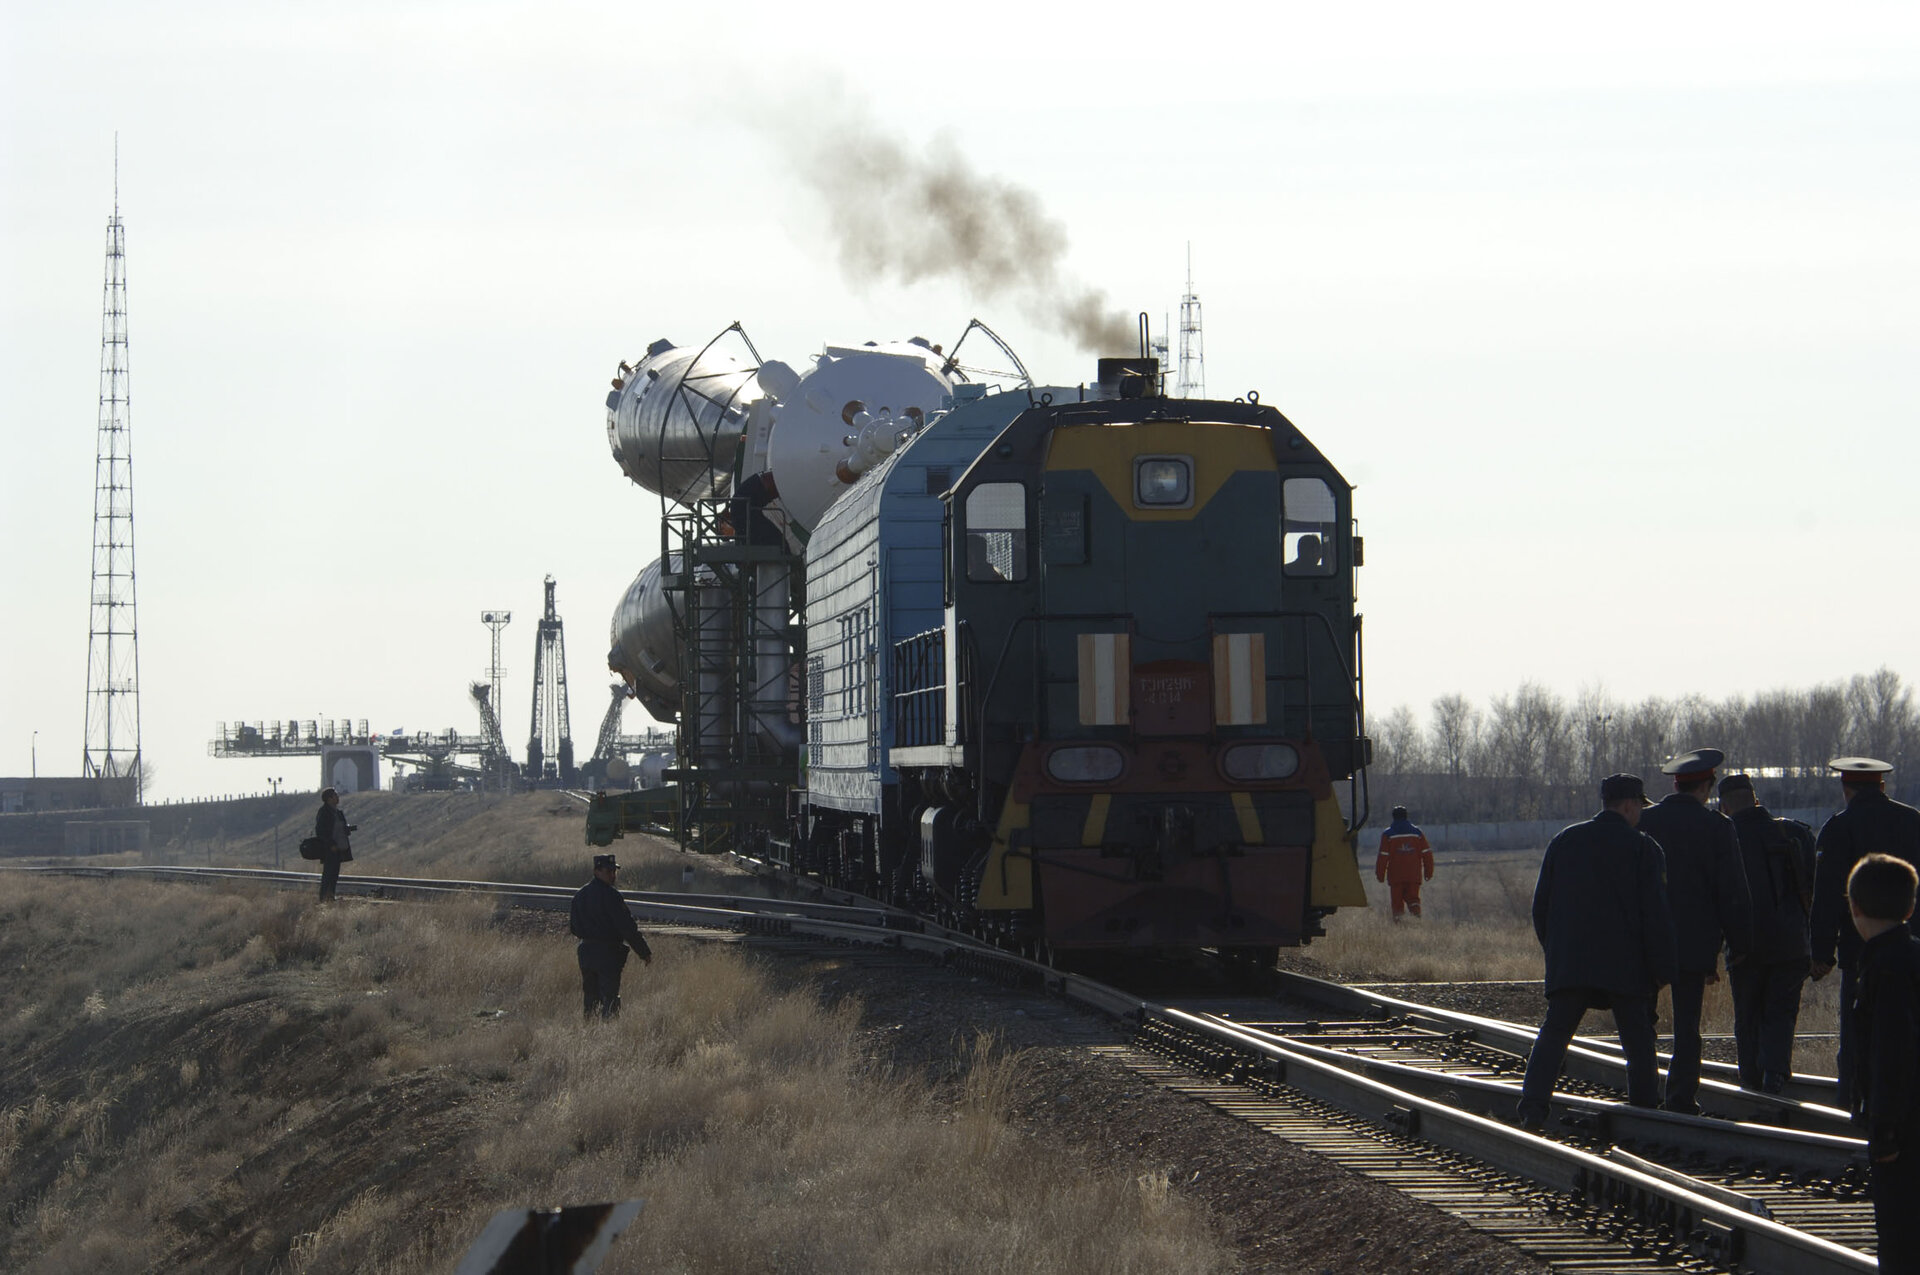 Soyuz FG launch vehicle carrying the Soyuz TMA-6 spacecraft is transferred to the launch pad